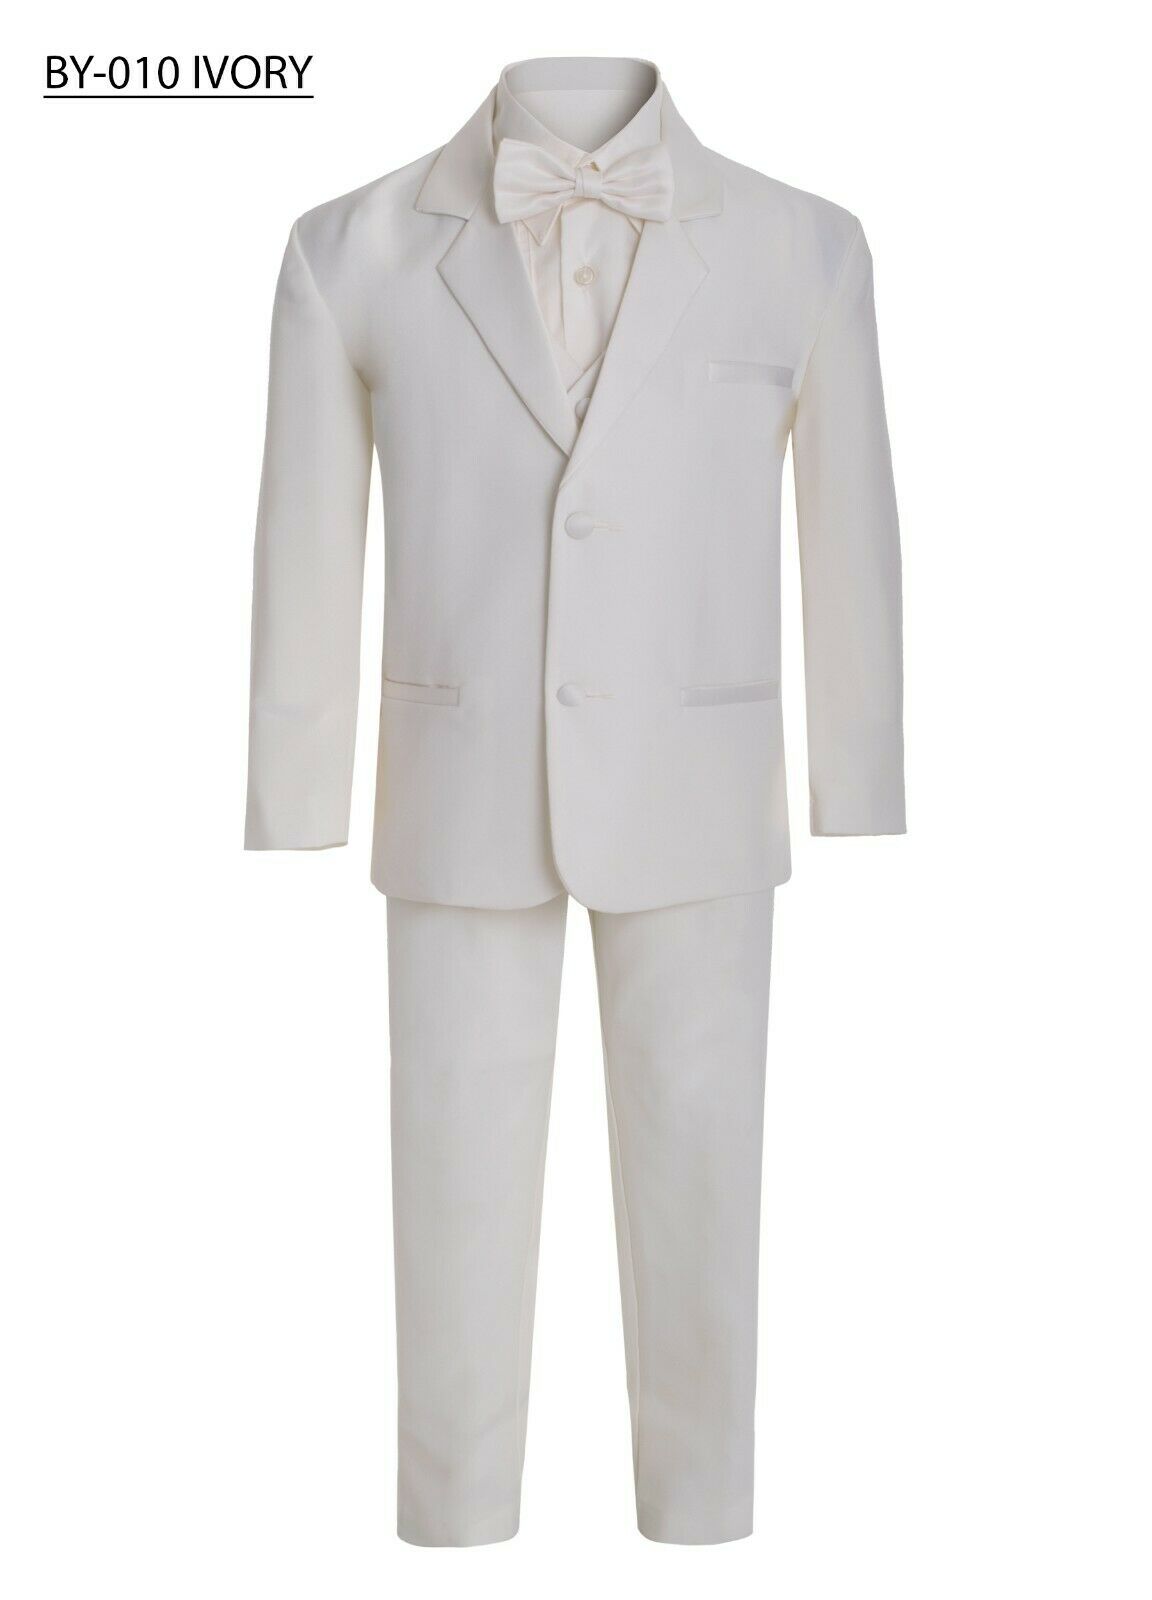 Boy's Suits and Tuxedos For Kids Tuxedos Online